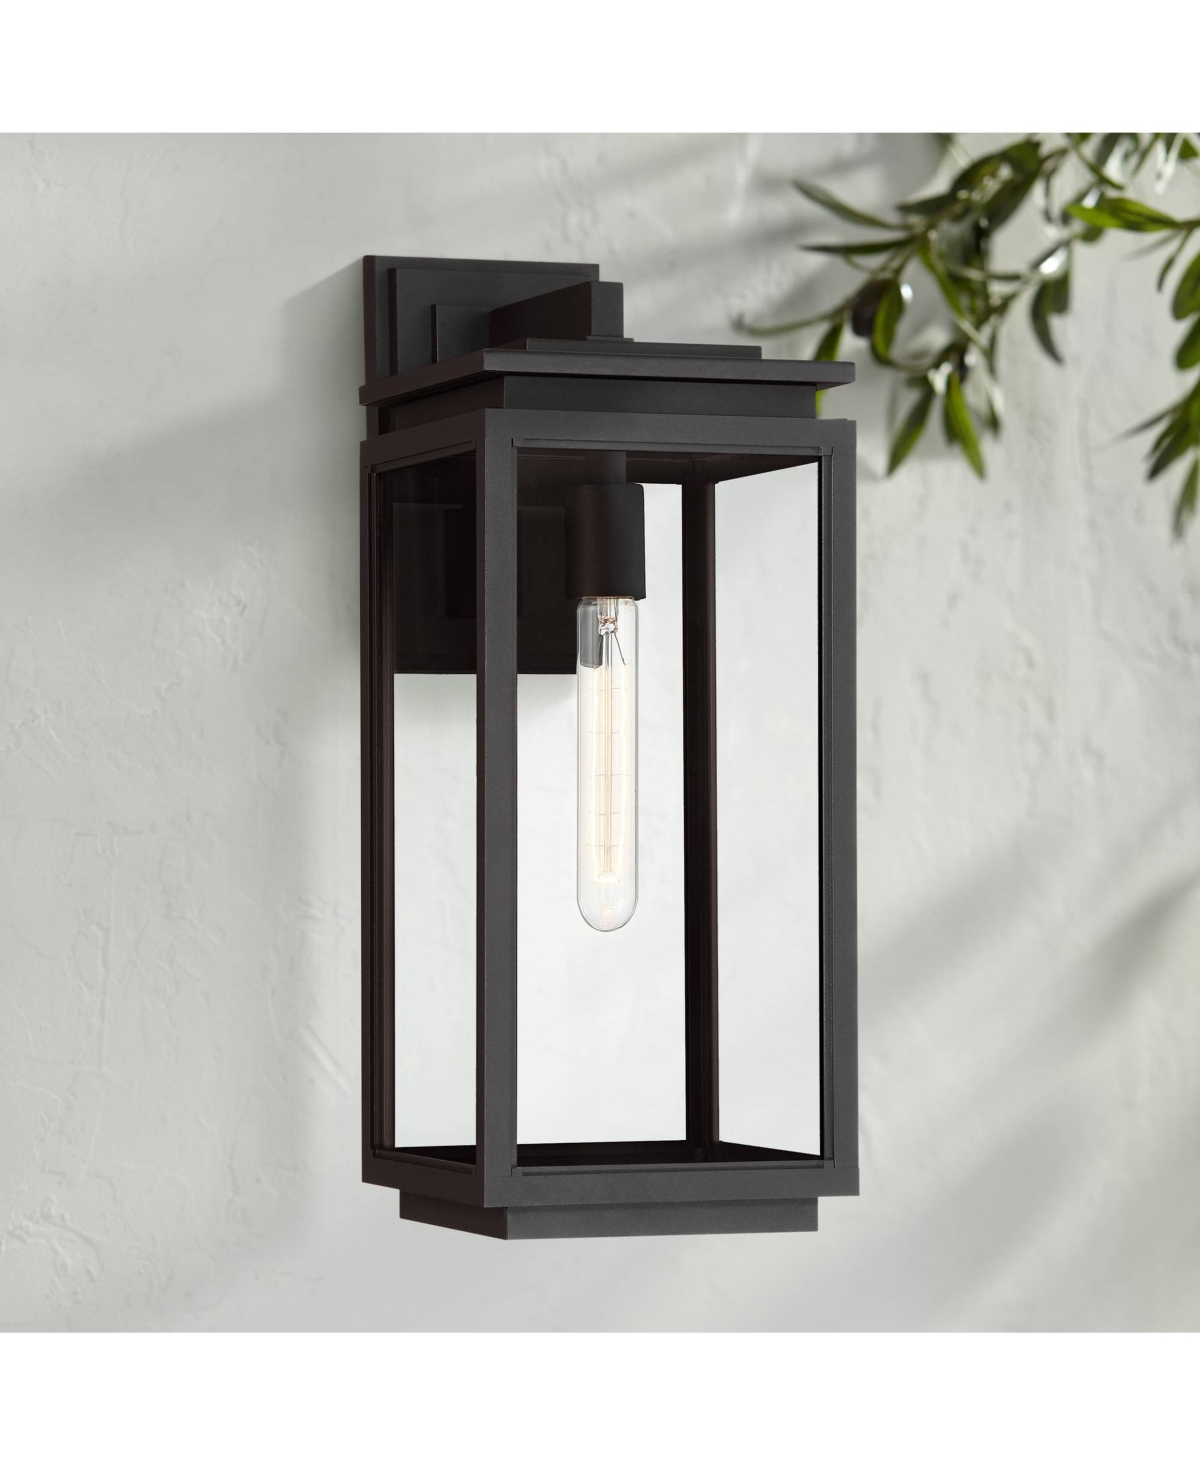 Atkins Modern Outdoor Wall Light Fixture Matte Black 18" Clear Glass for Post Exterior Barn Deck House Porch Yard Patio Outside Garage Front Door - Po